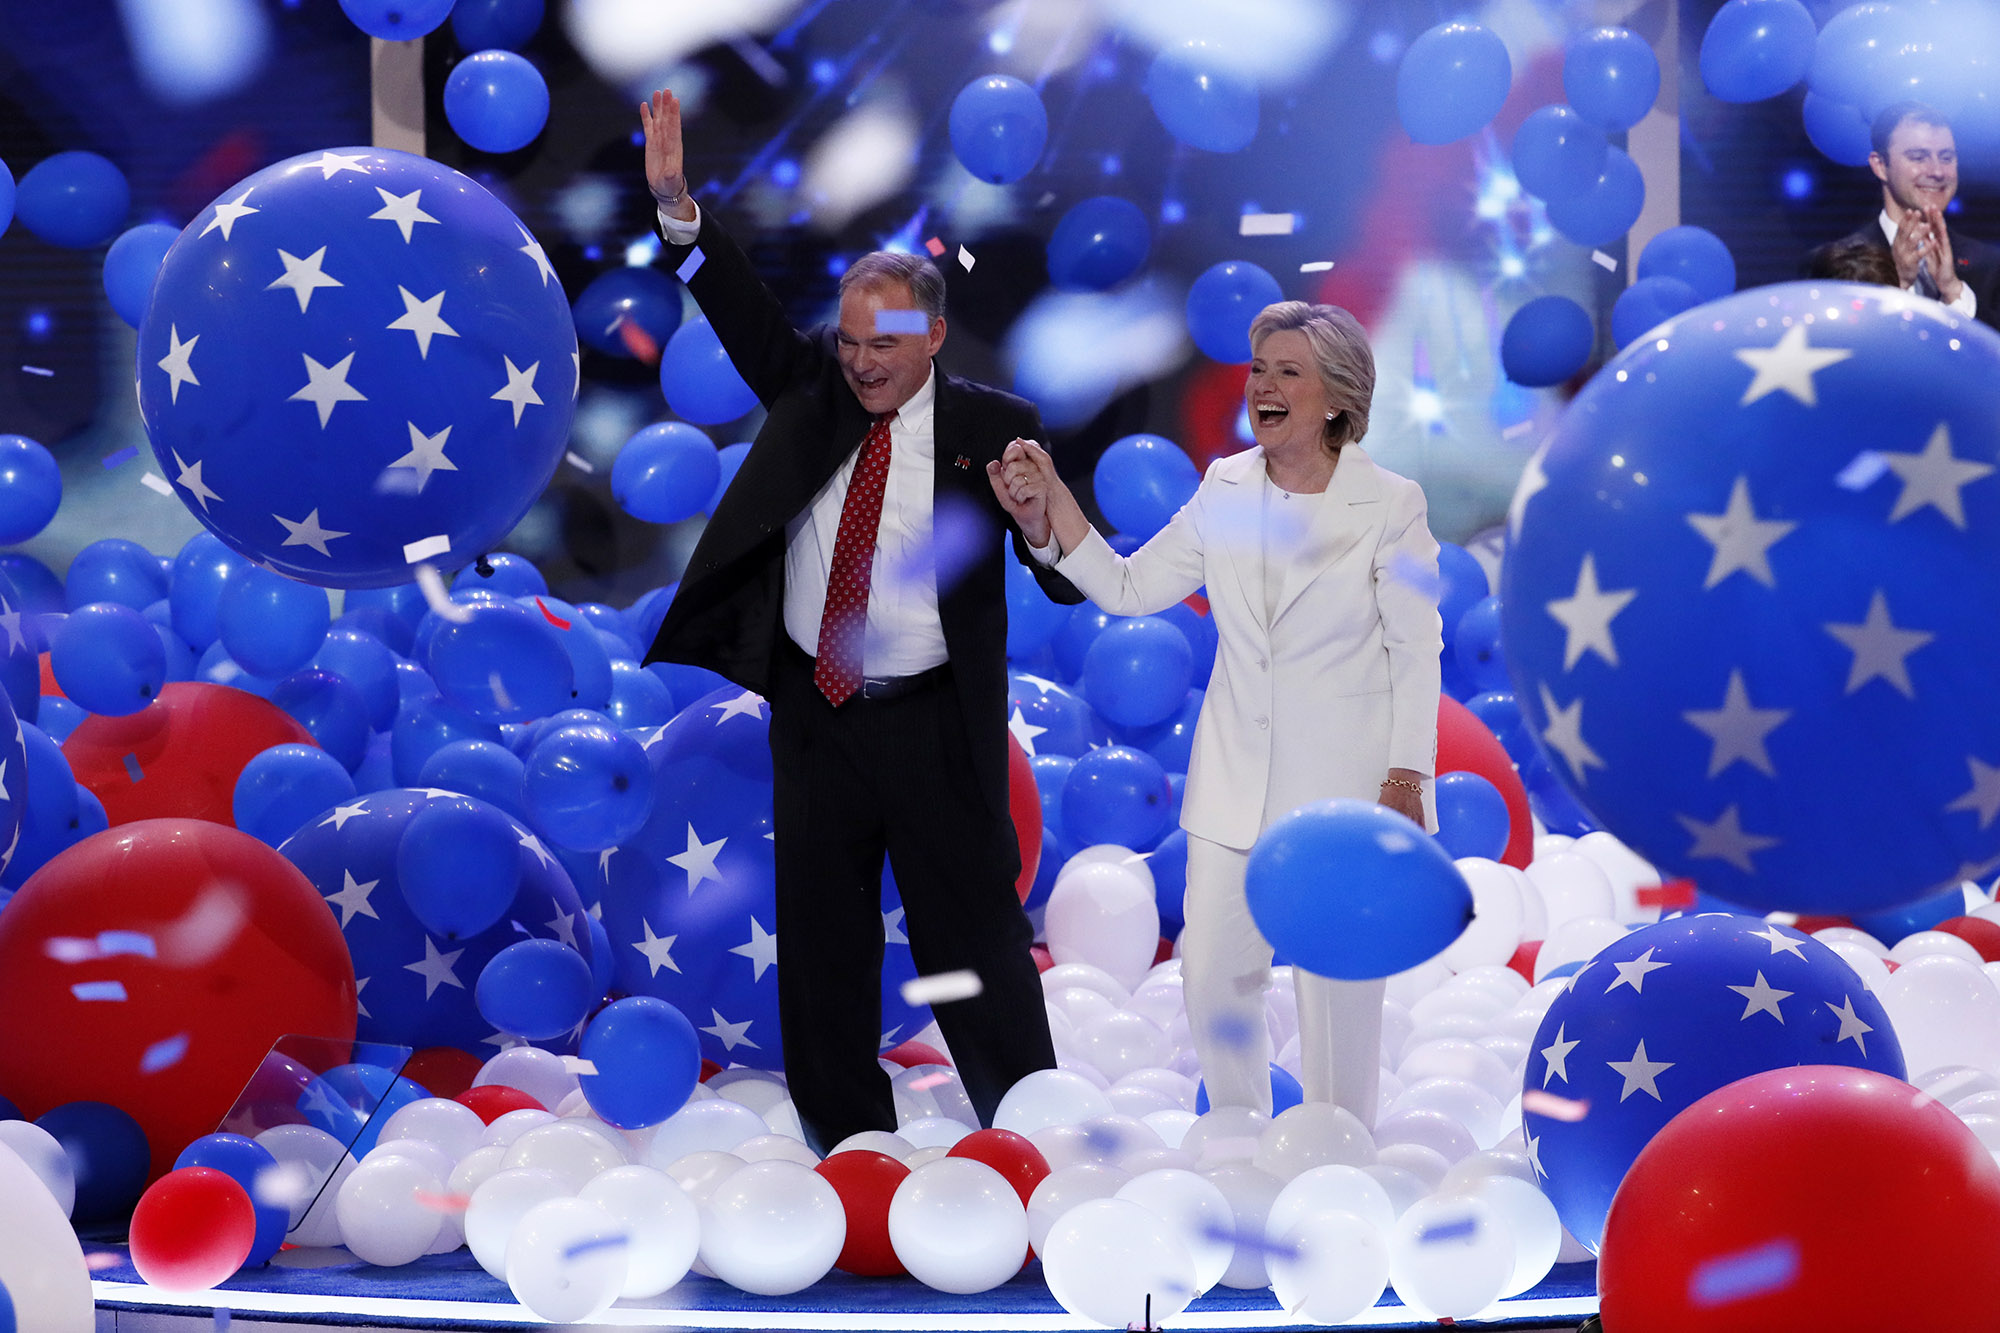 PHOTO: Democratic presidential nominee Hillary Clinton and Democratic vice presidential nominee Sen. Tim Kaine, walk through the falling balloons during the final day of the Democratic National Convention in Philadelphia, July 28, 2016.